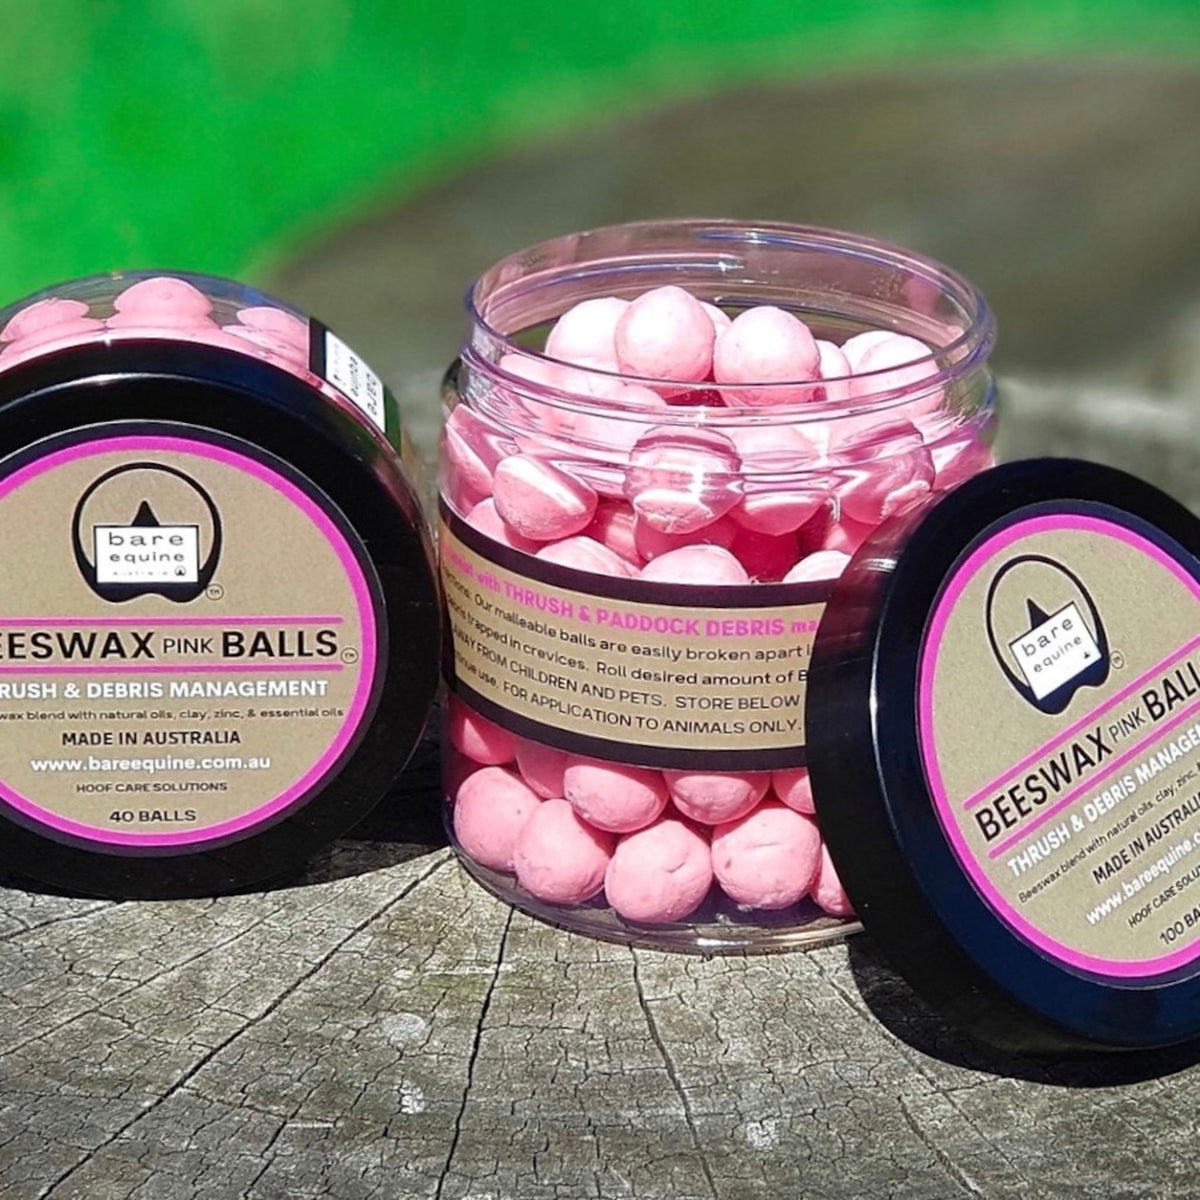 Pink beeswax balls in small container next to a large jar of pink beeswax balls.